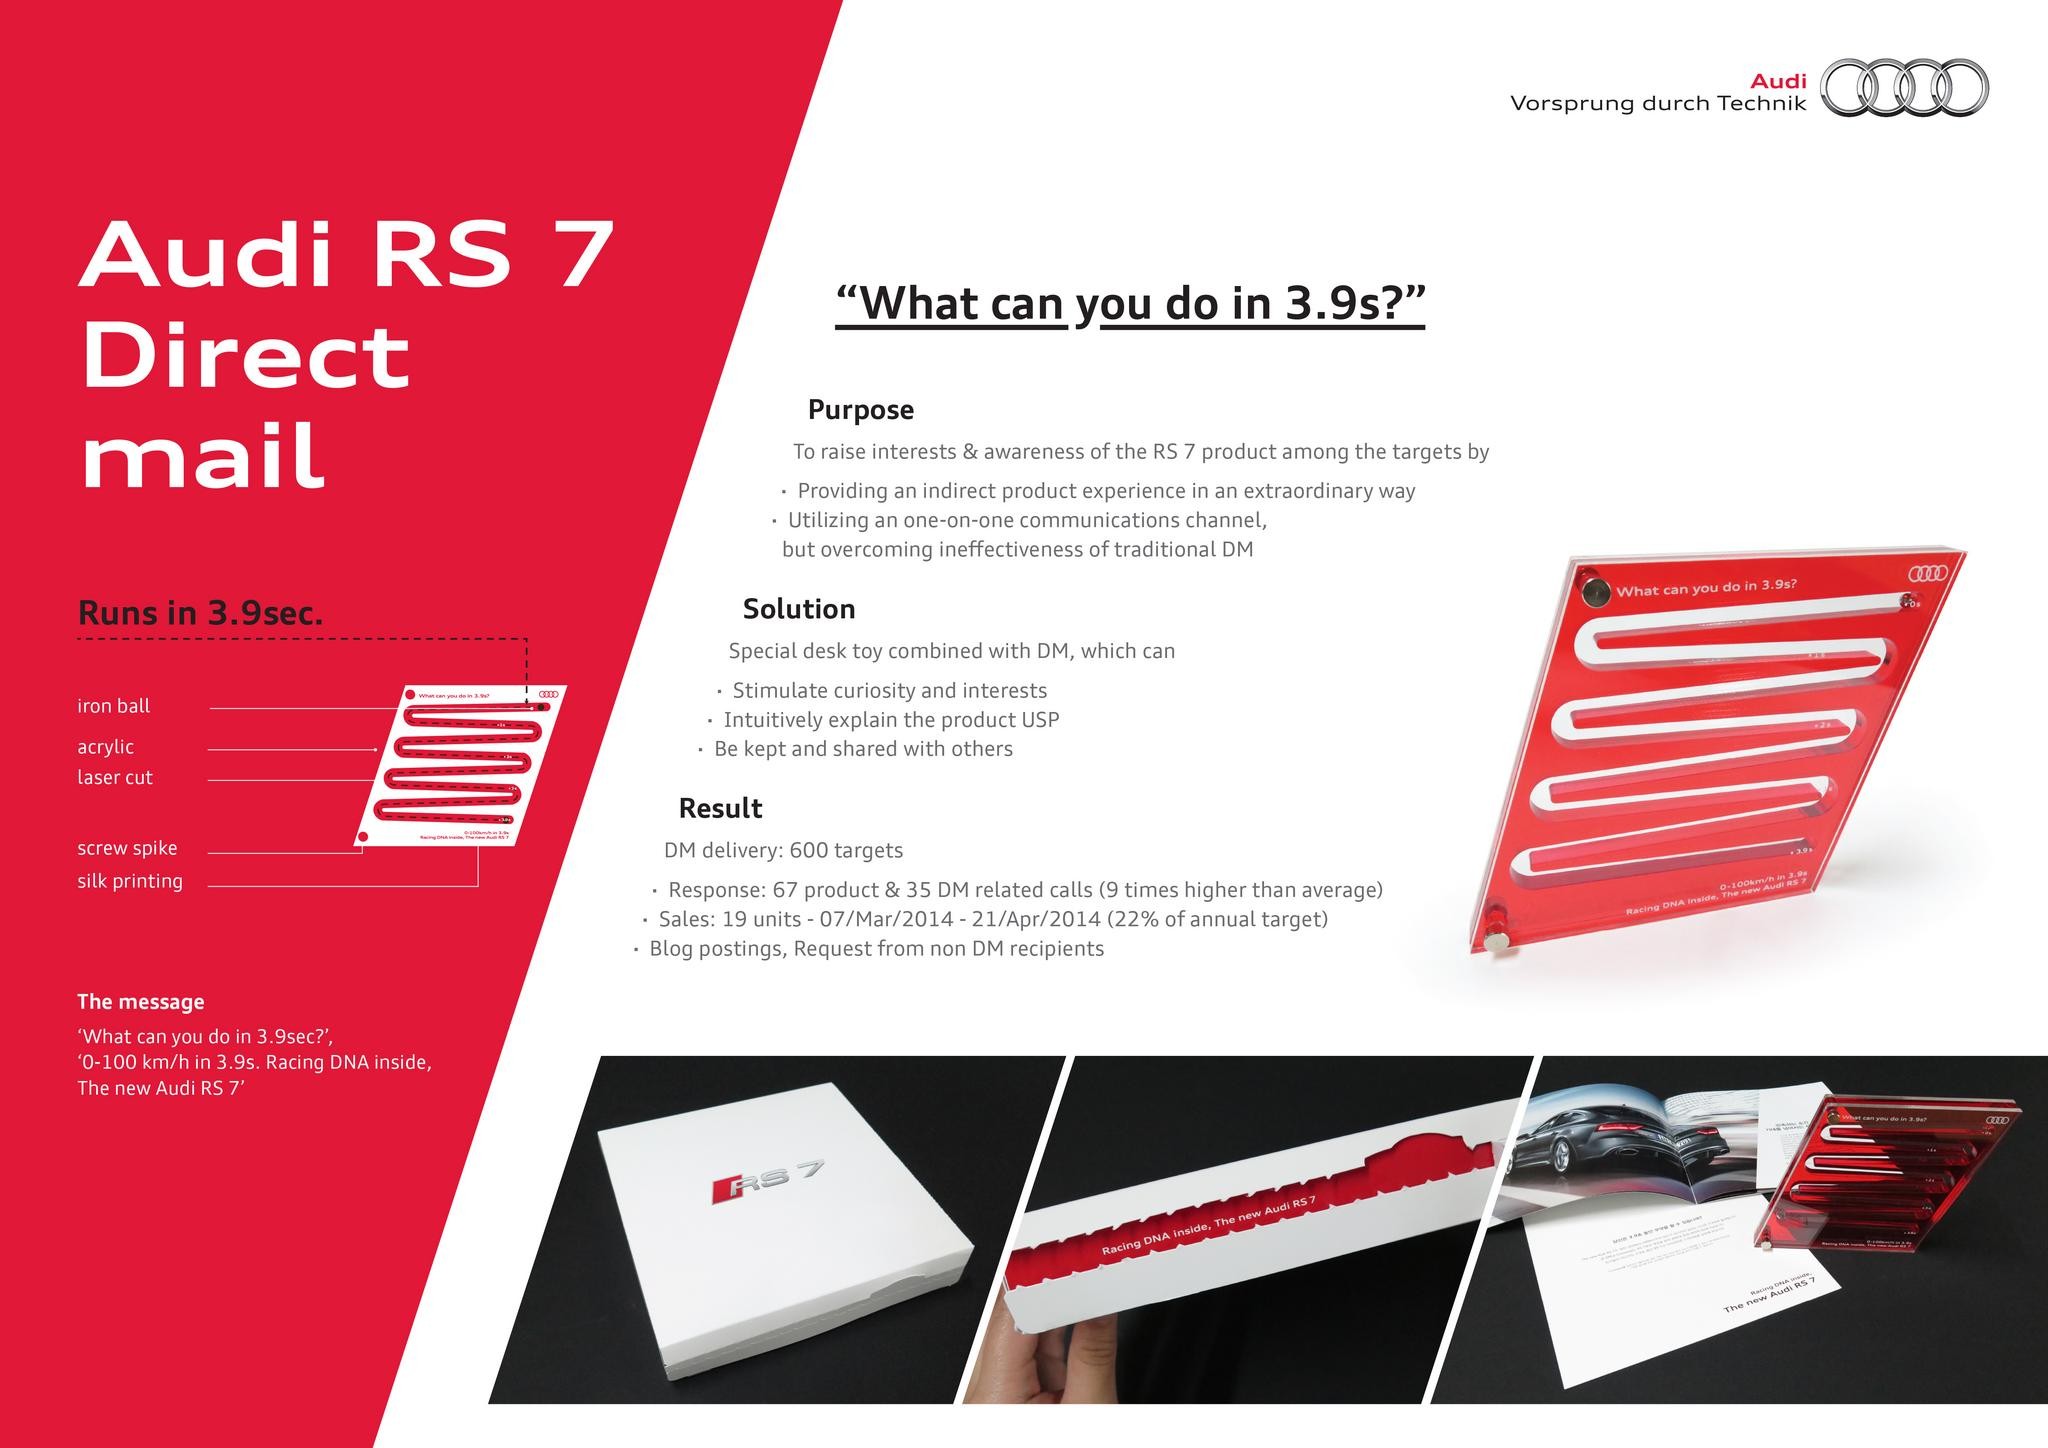 THE NEW AUDI RS7 DIRECT MAIL